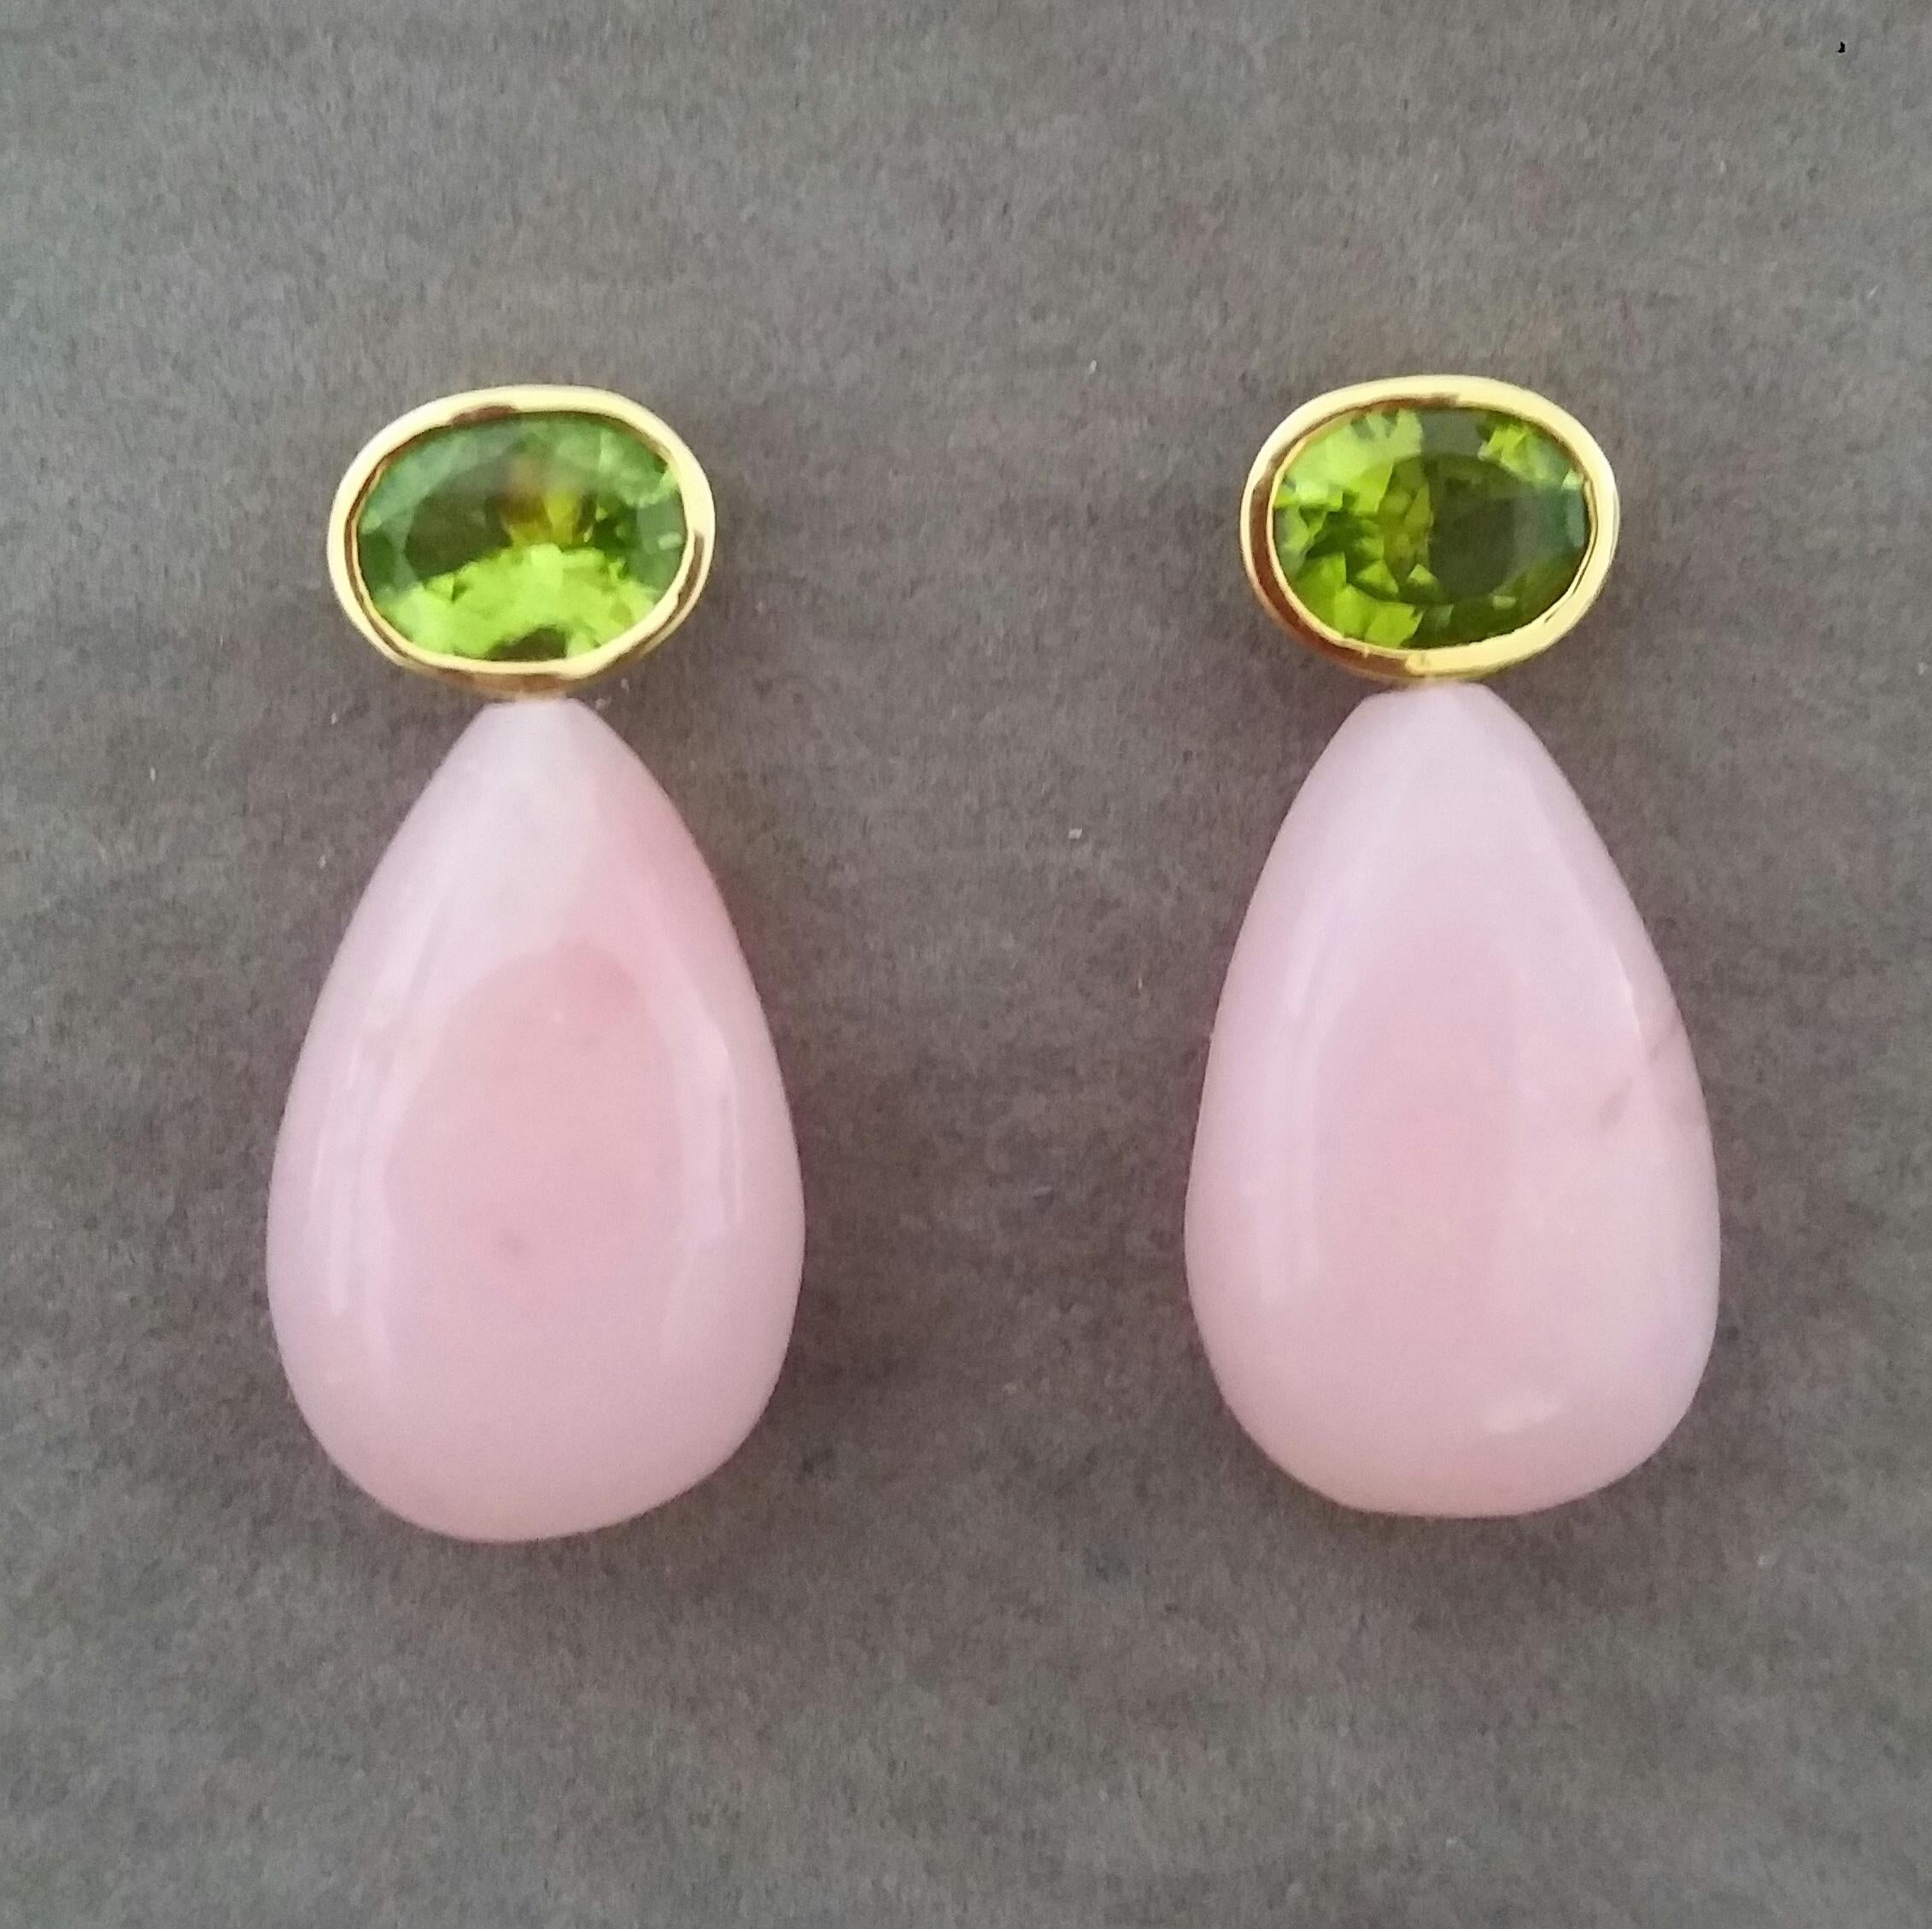 These simple but elegant earrings have 2 faceted Oval Shape Peridot size 8x10 mm set in yellow gold bezel at the top to which are suspended 2 Pink Opal Plain Round Drops measuring 16 x 25 mm.

In 1978 our workshop started in Italy to make